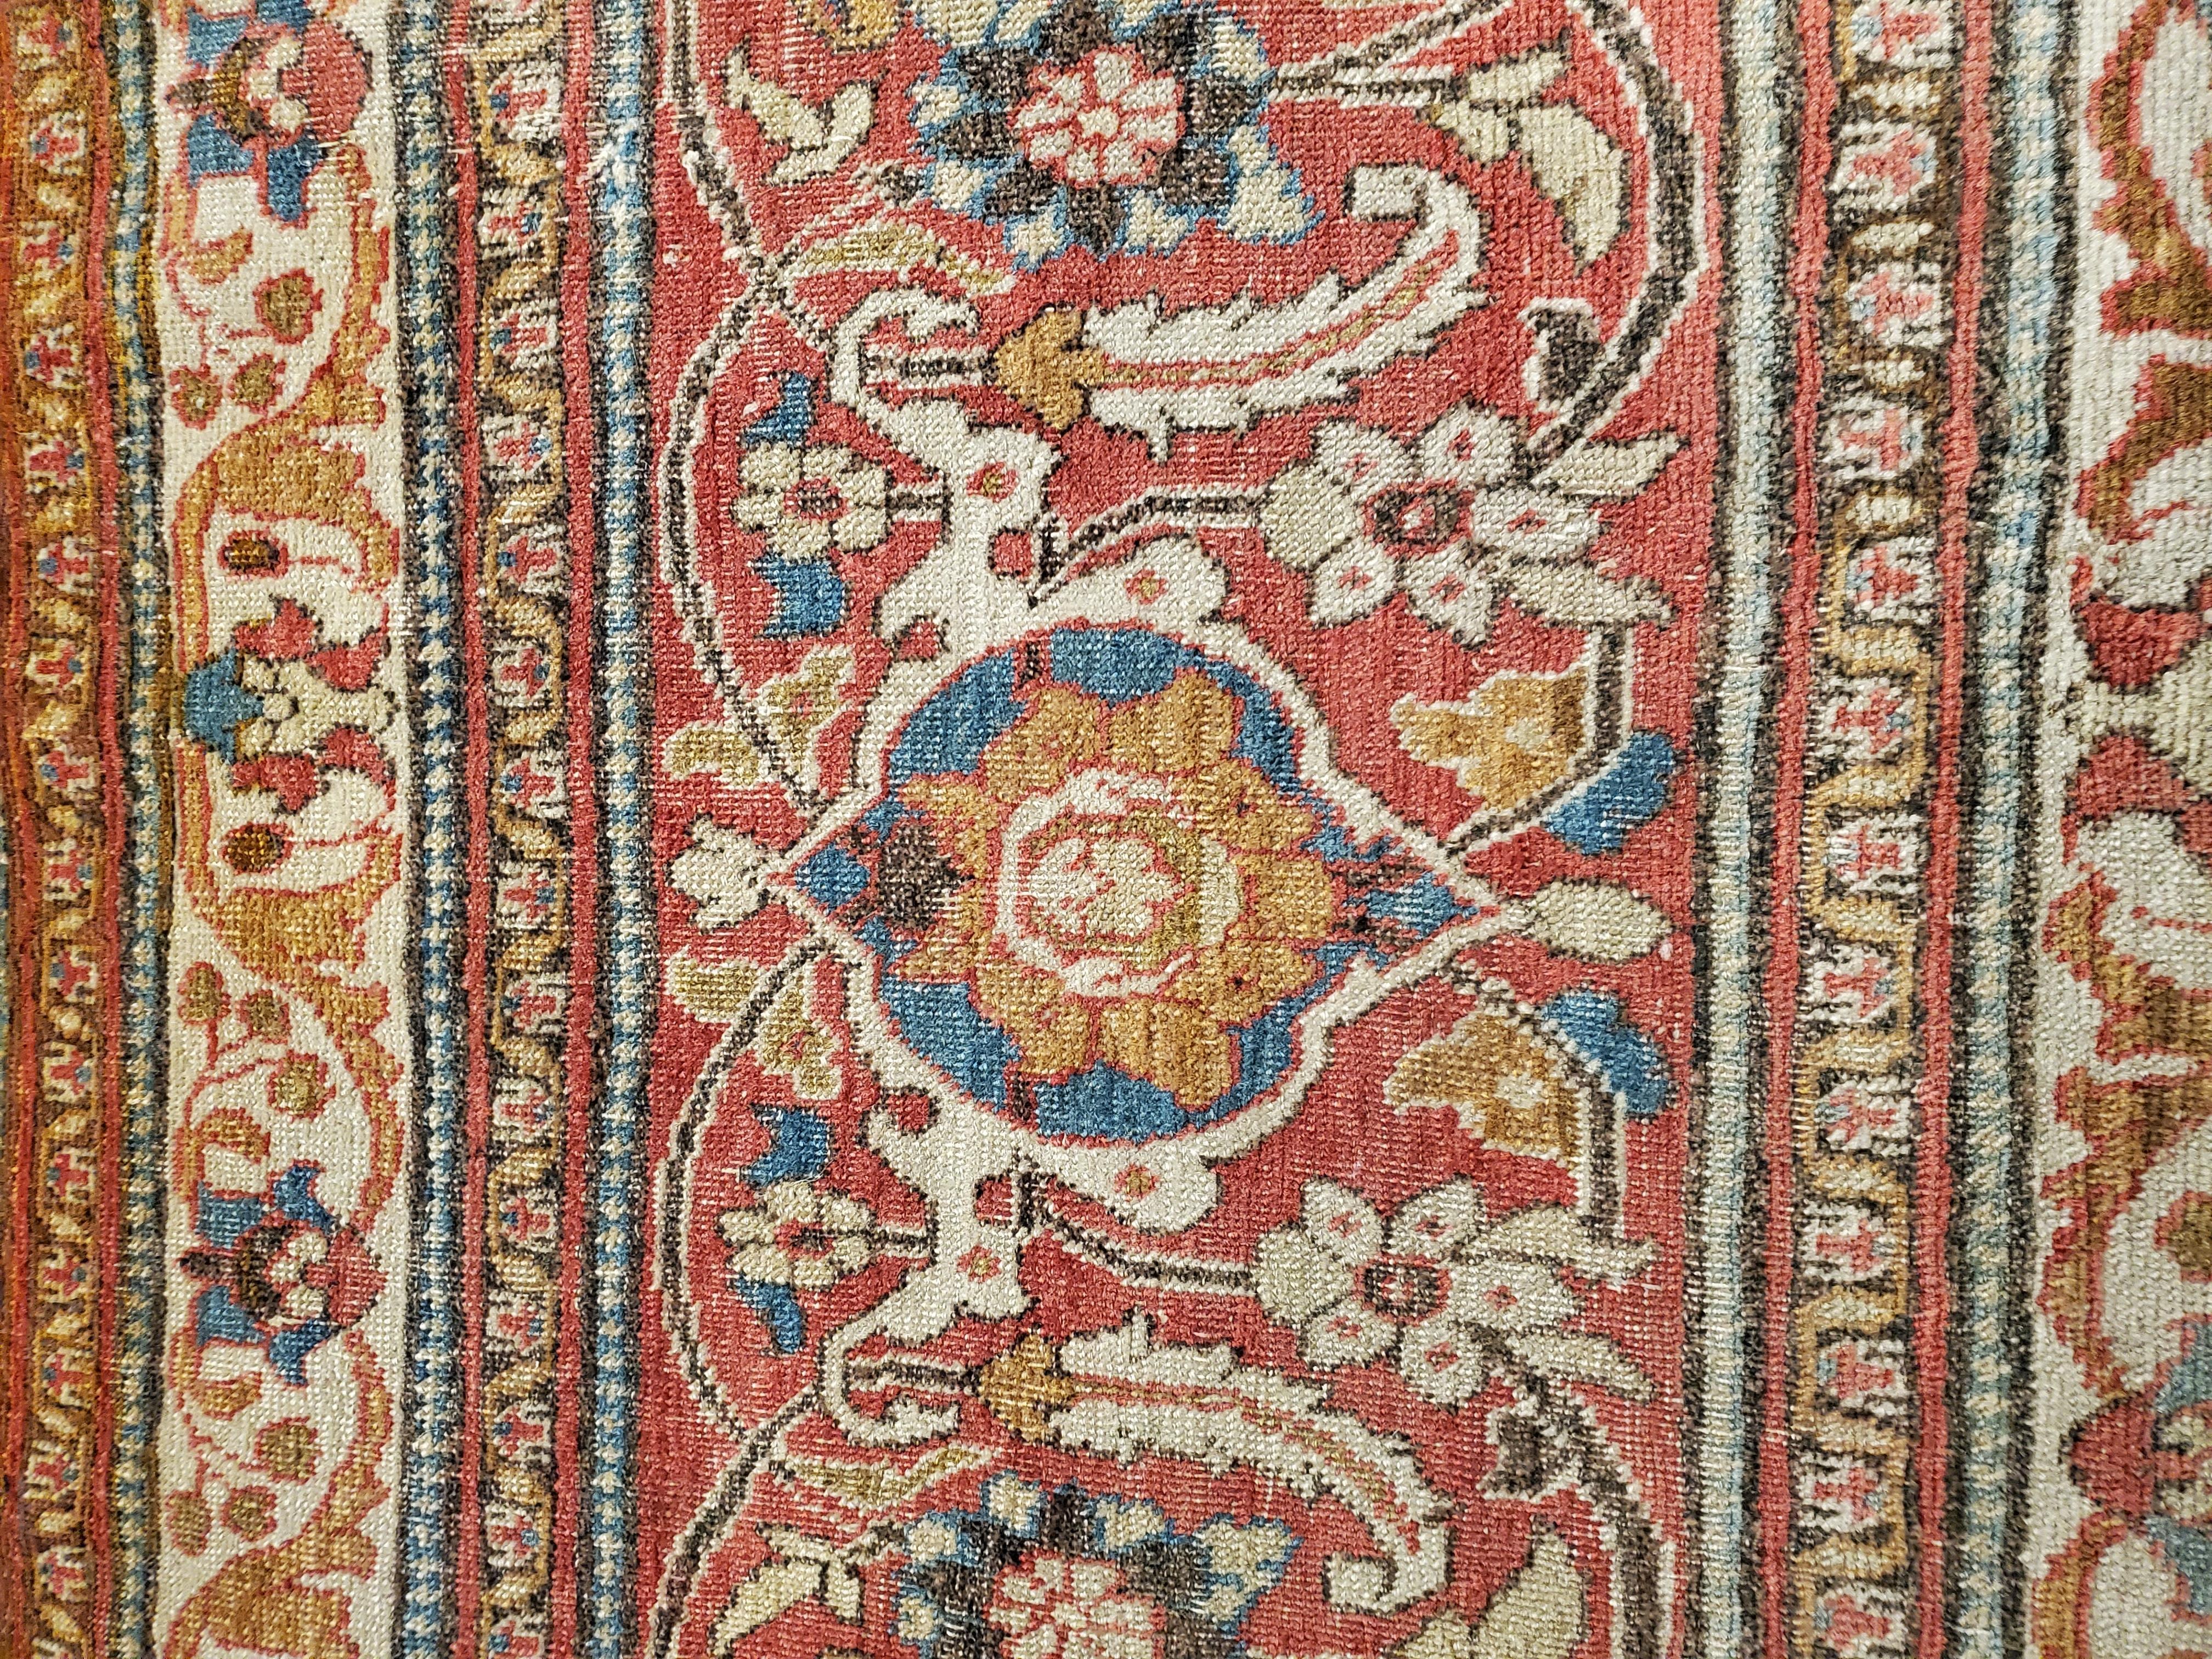 Antique Tabriz Carpet, Handmade Persian Rug in Floral Gold, Red and Beige In Good Condition For Sale In Port Washington, NY